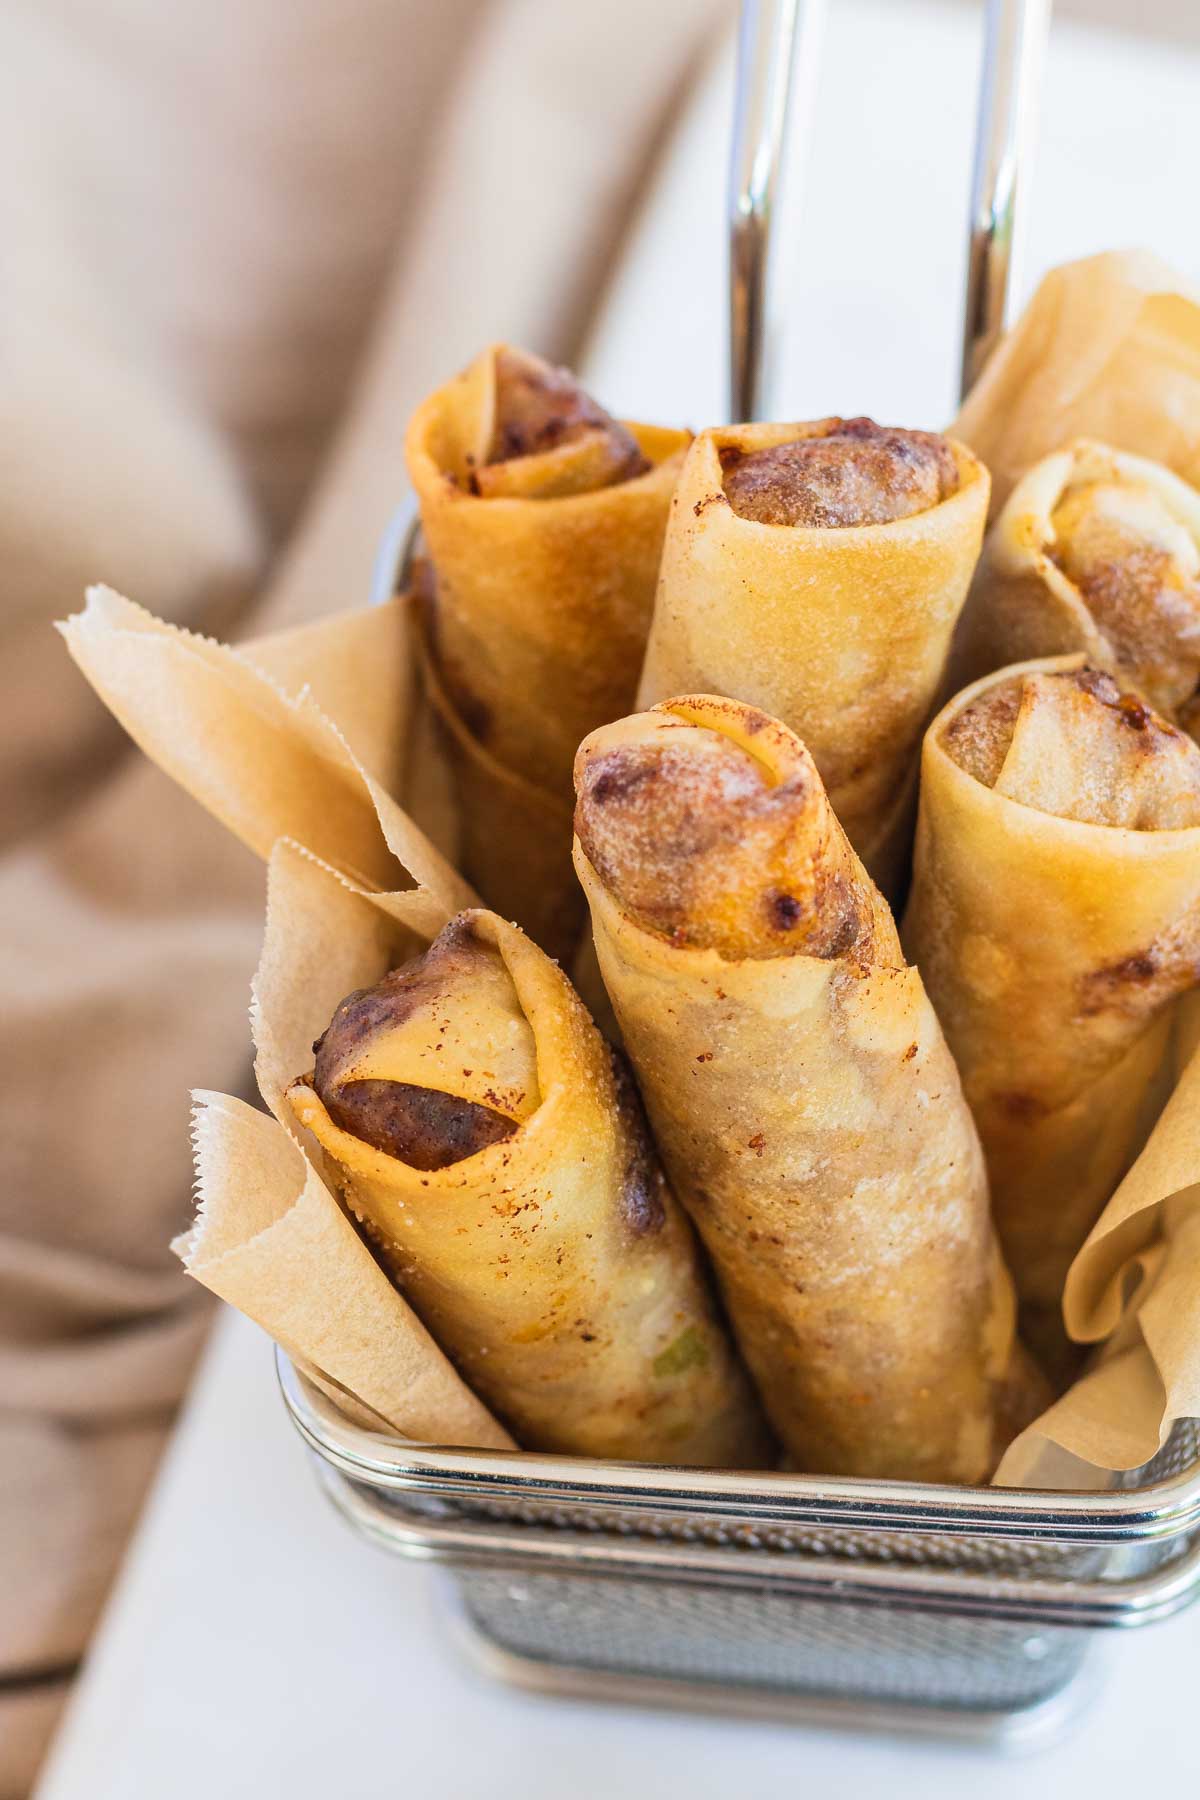 Cheeseburger spring rolls standing on end in metal fry baskets.